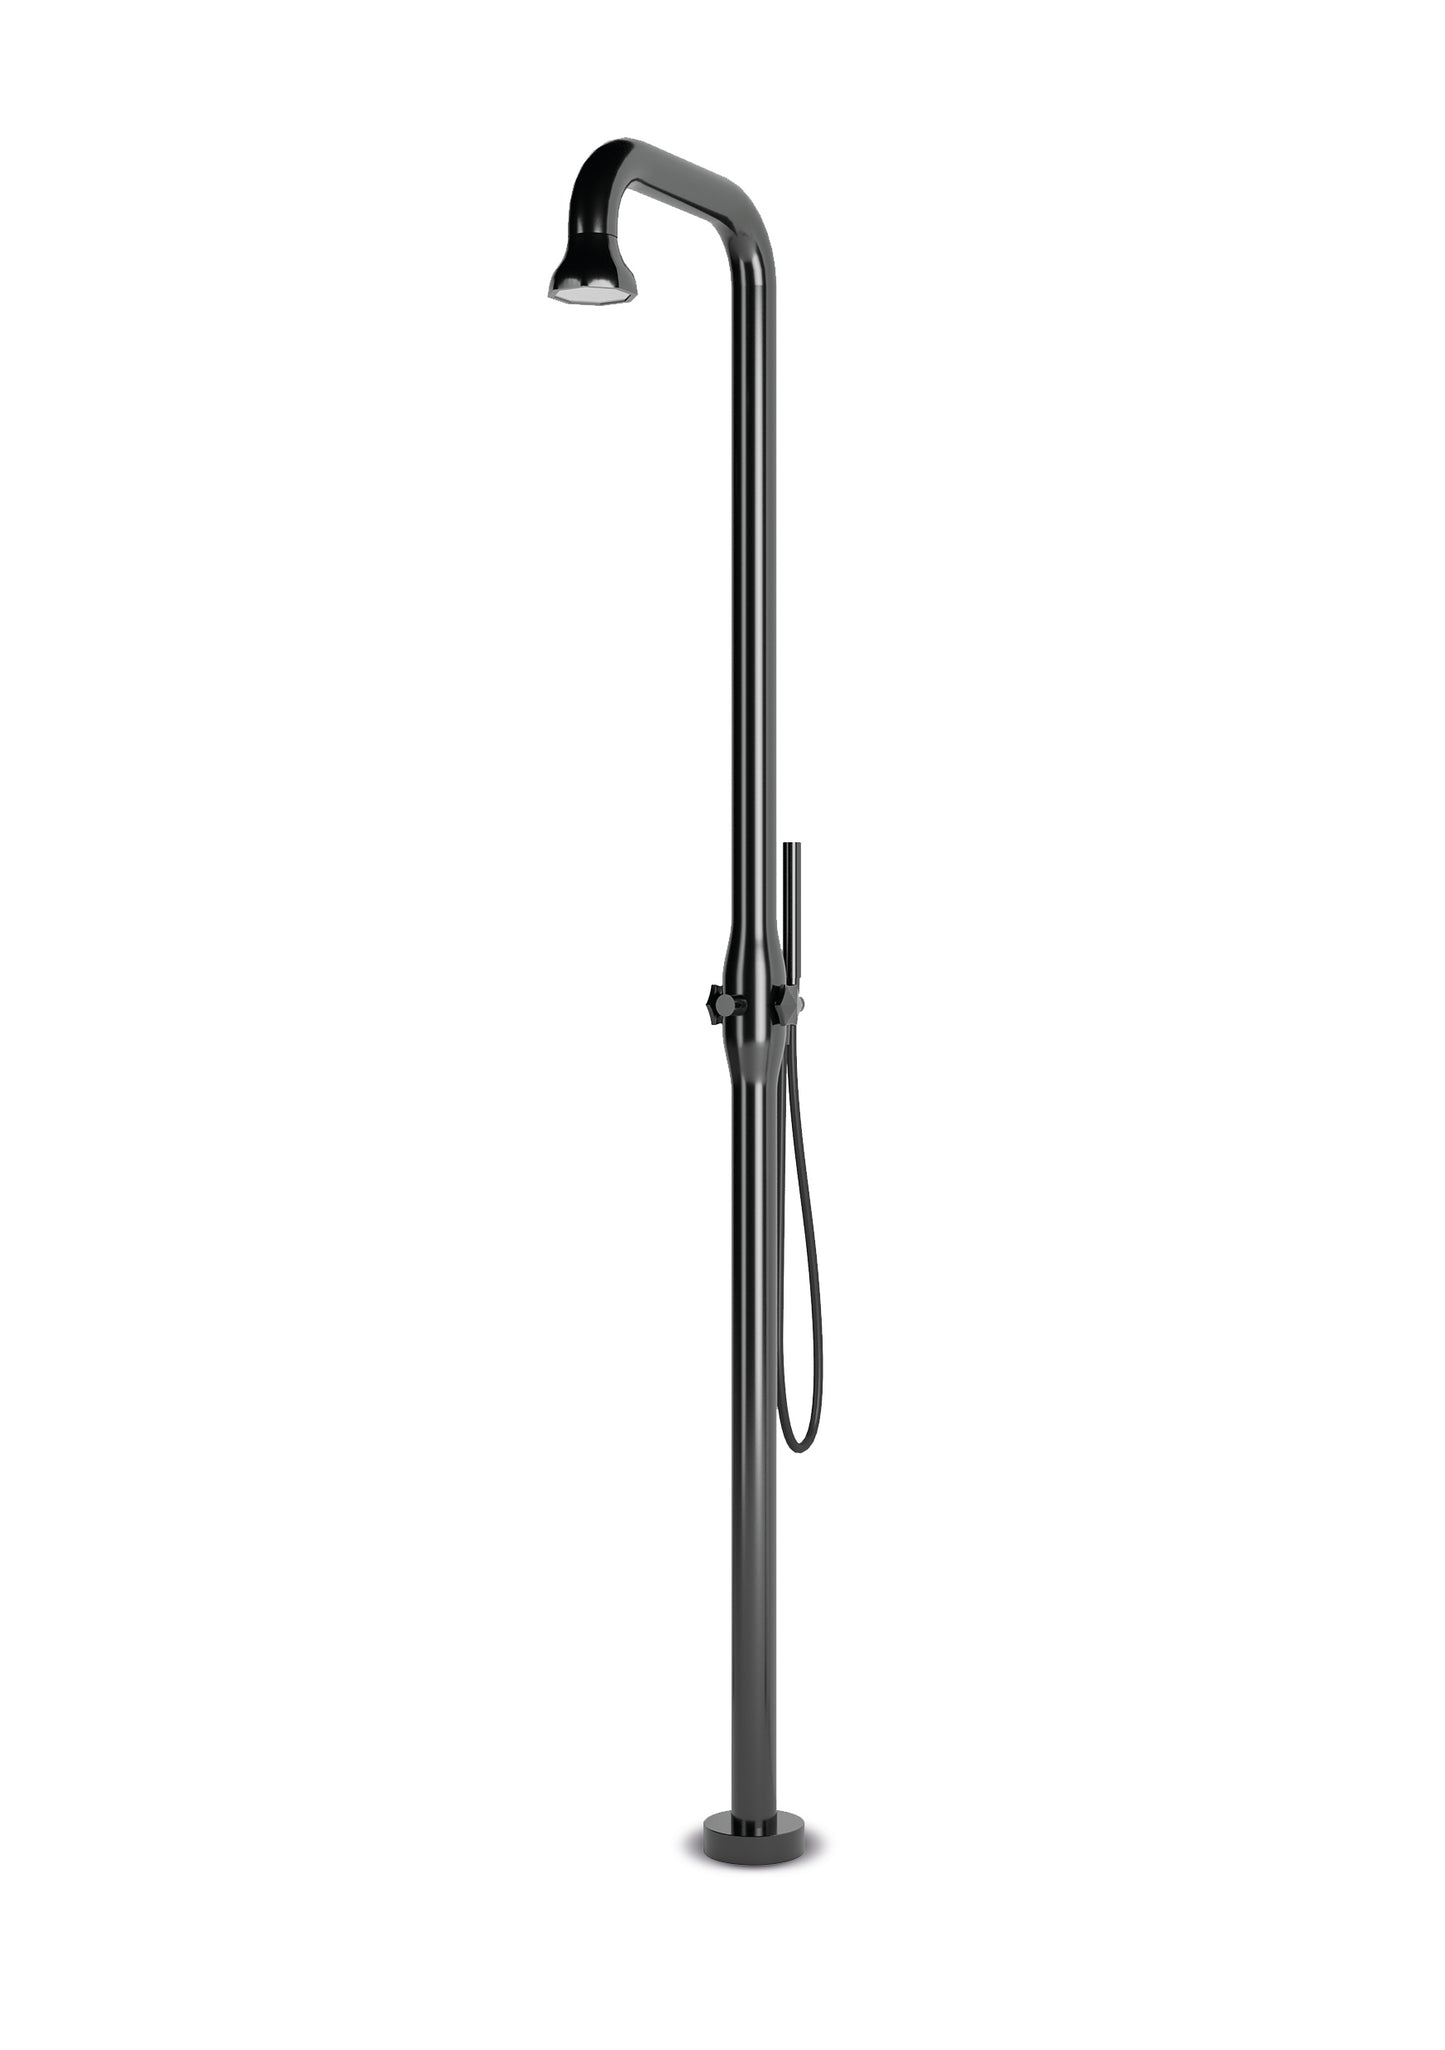 JEE-O Bloom Shower 02 Freestanding Shower Faucet Stainless Steel with Hand Shower, Gun Metal